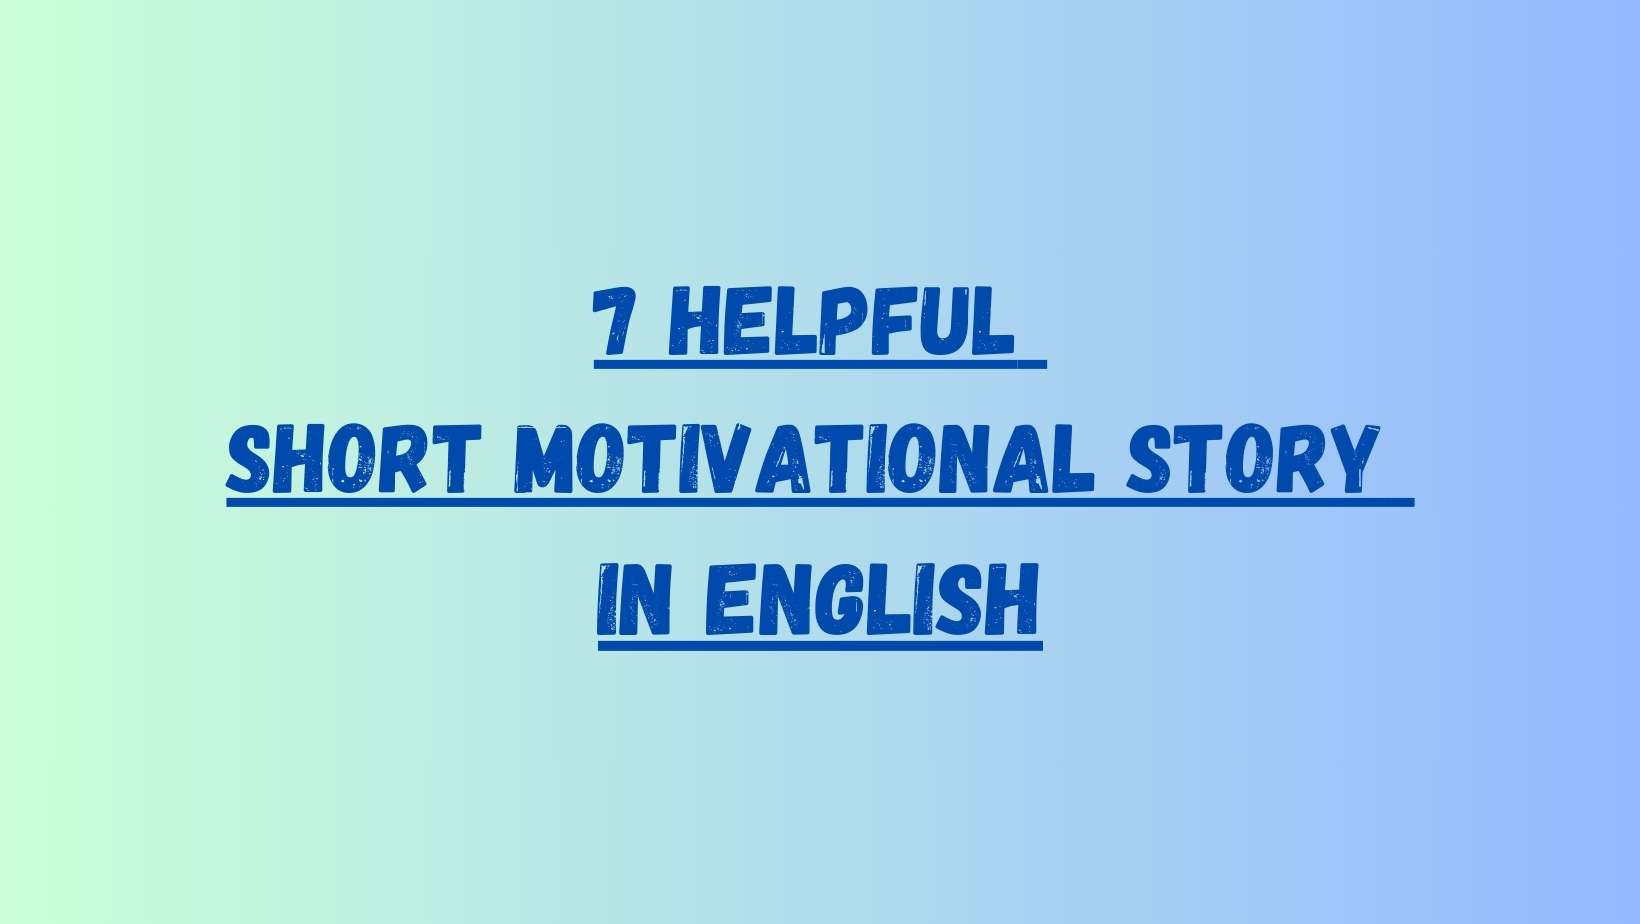 Short Motivational Story in English